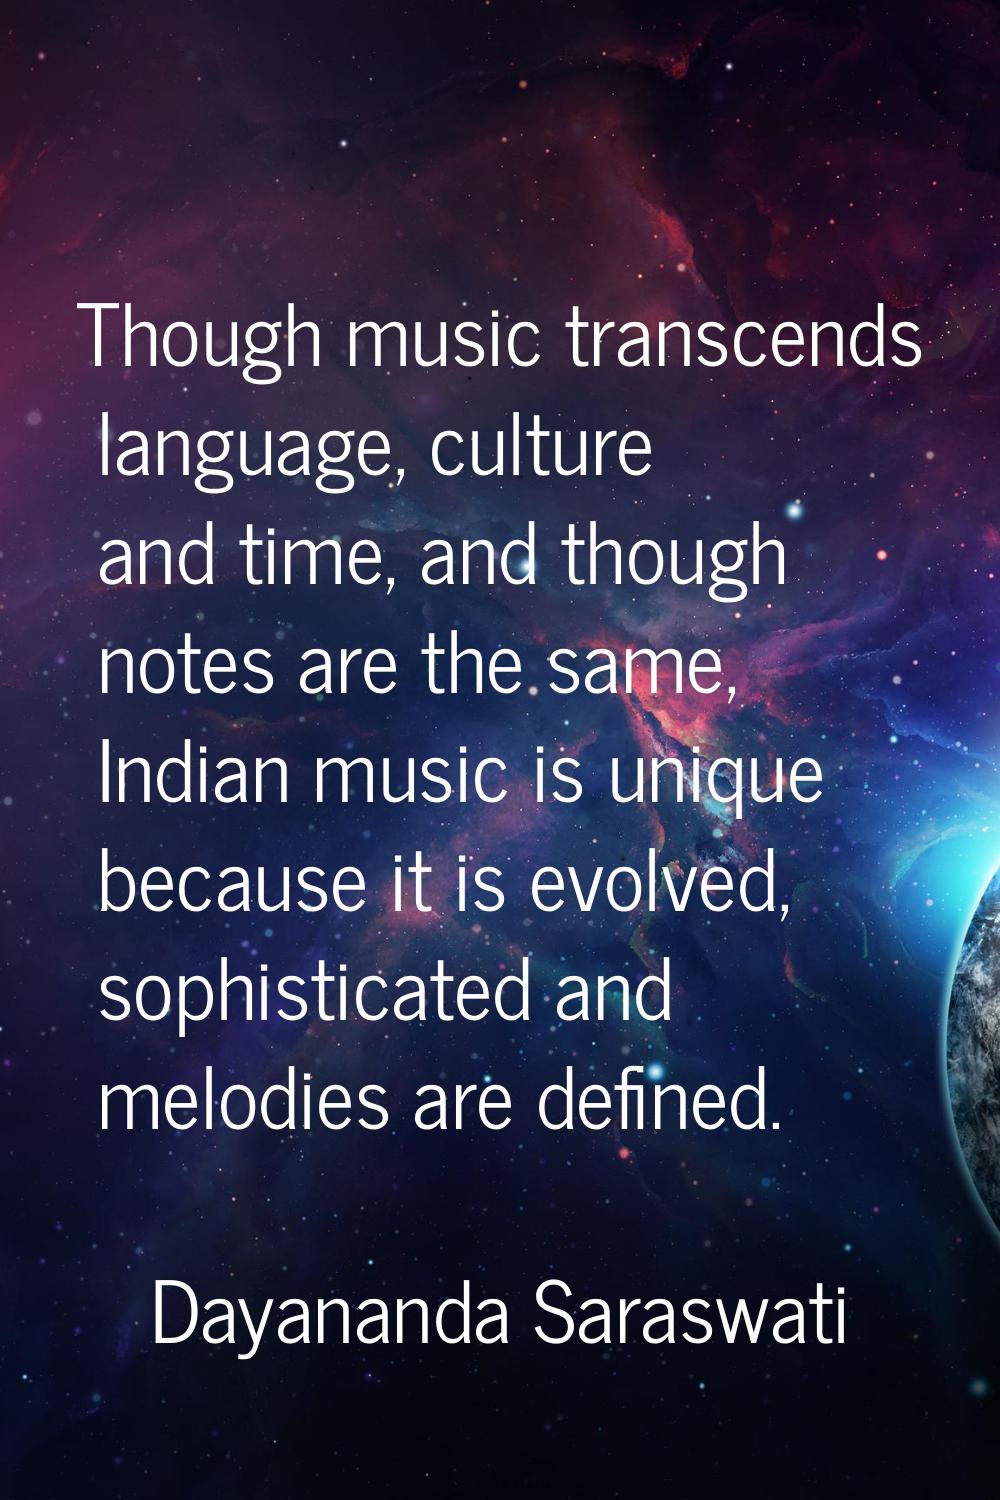 Though music transcends language, culture and time, and though notes are the same, Indian music is 